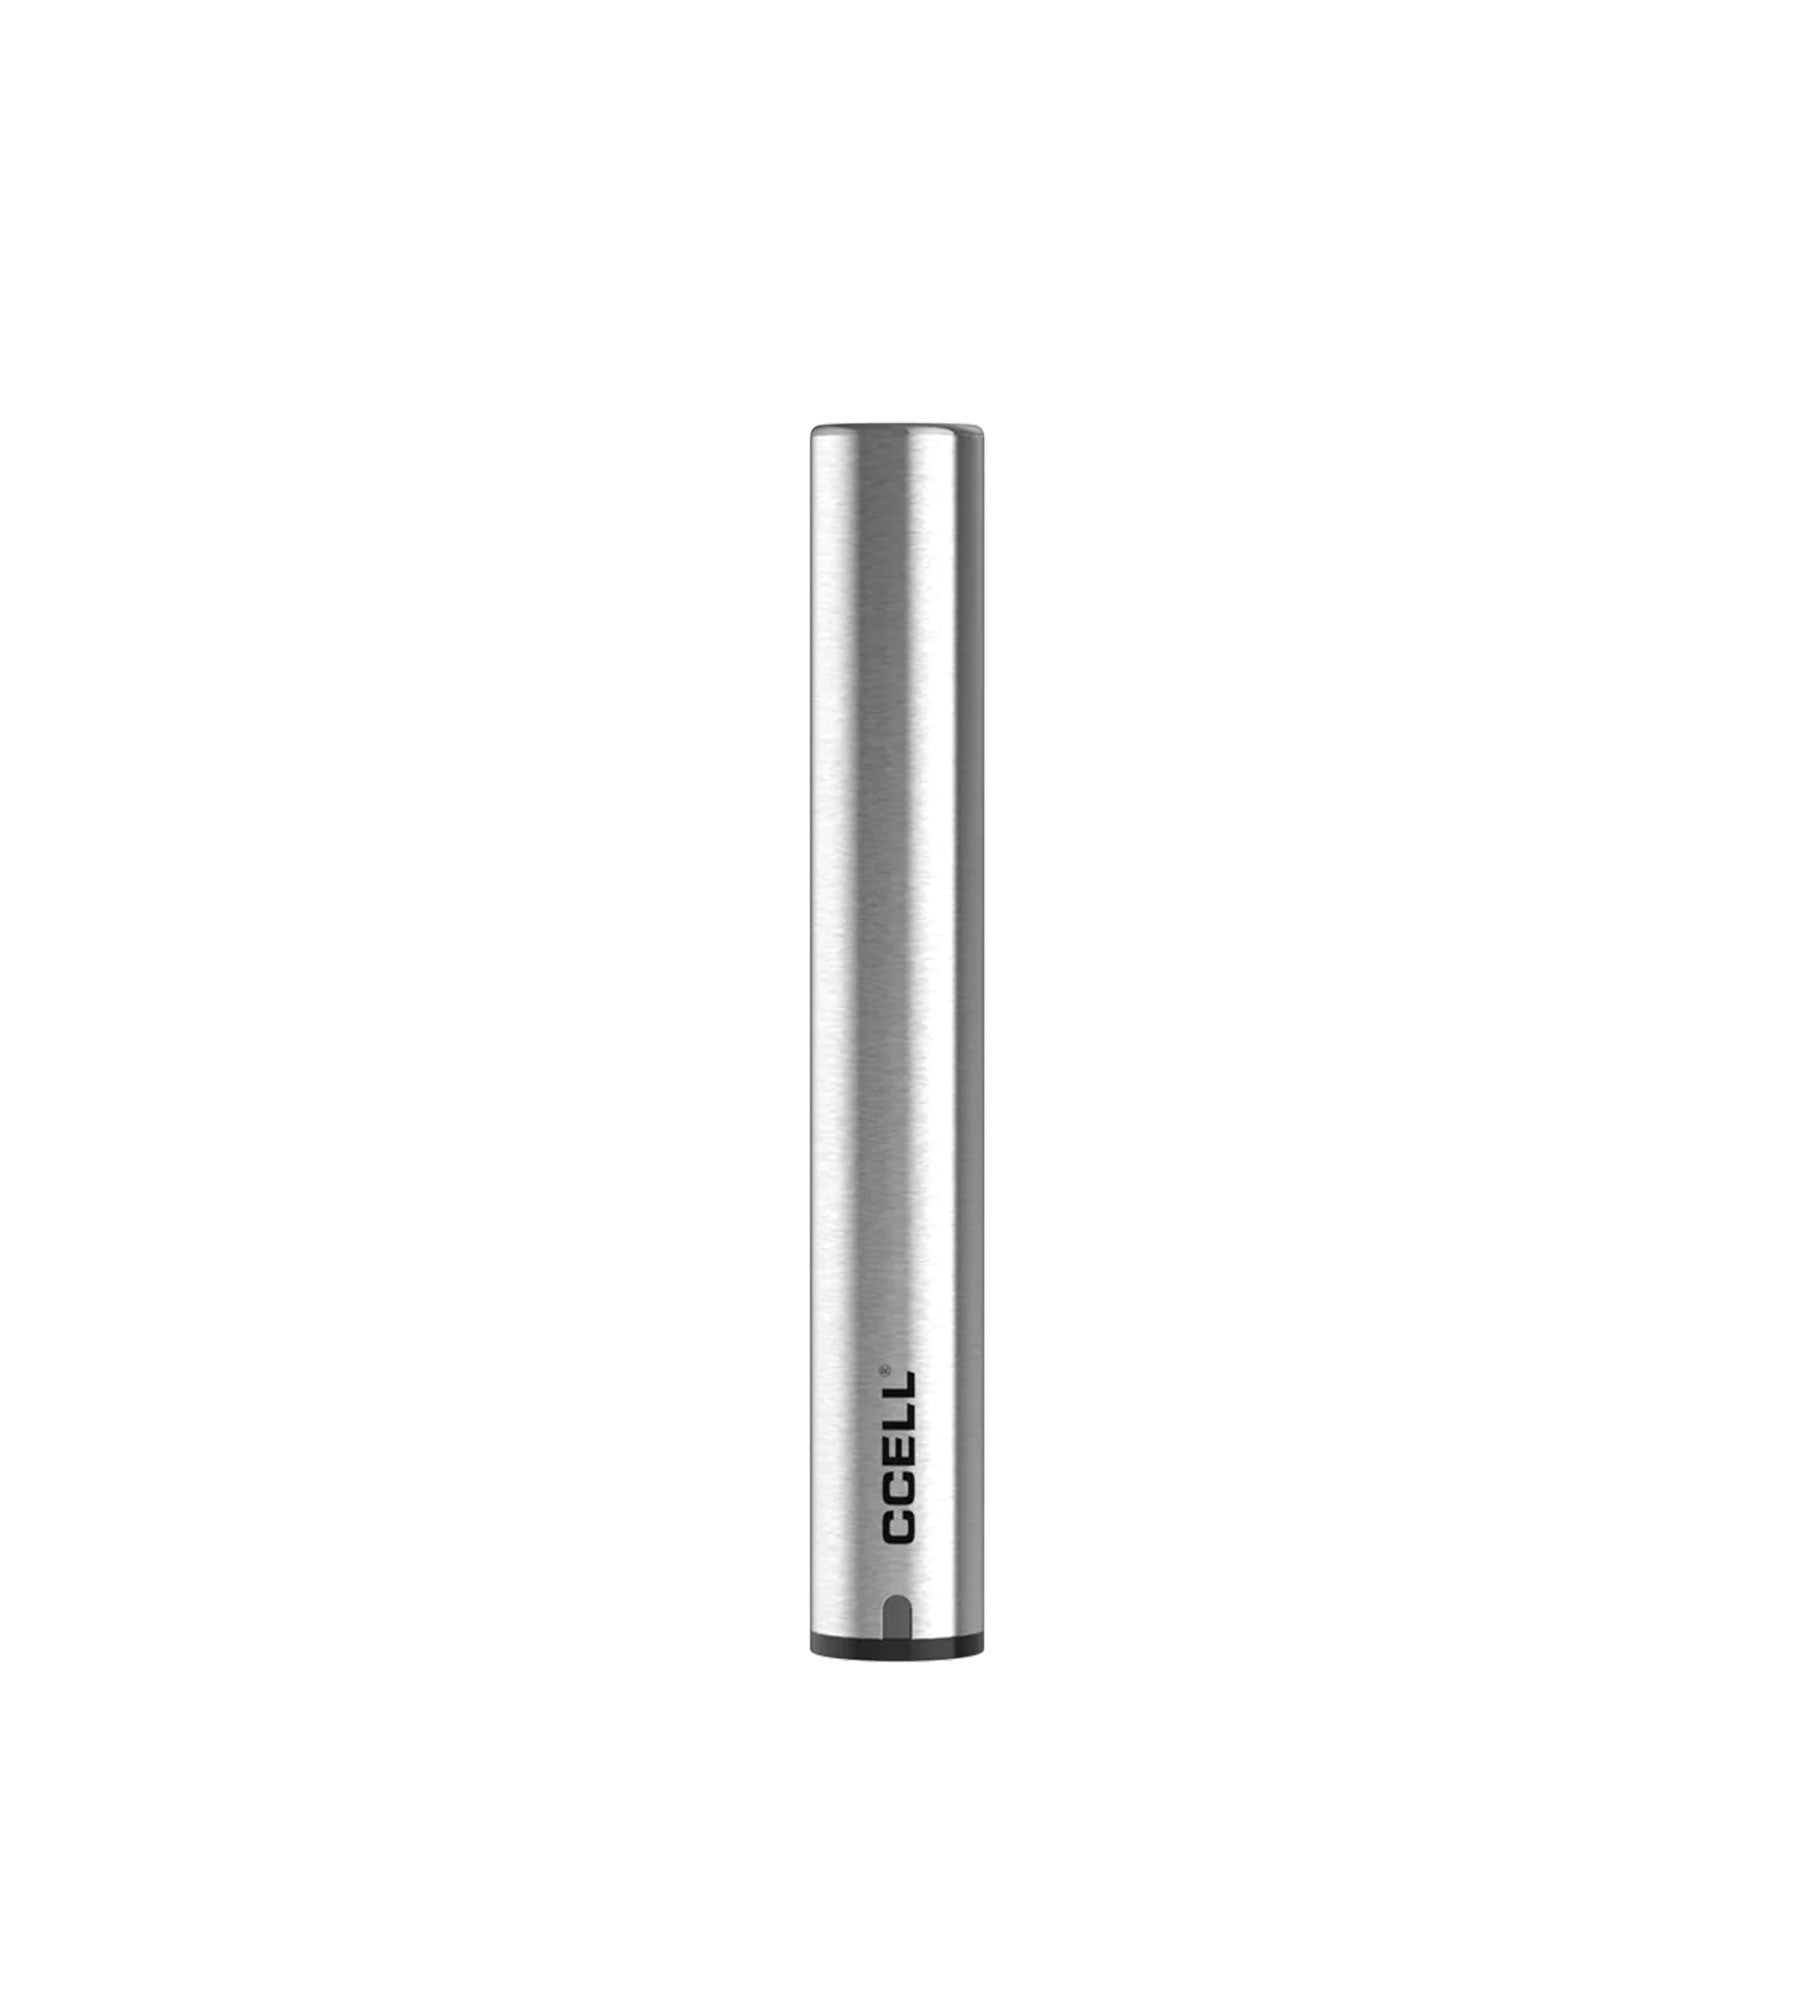 CCELL M3 Plus 510 Thread Battery